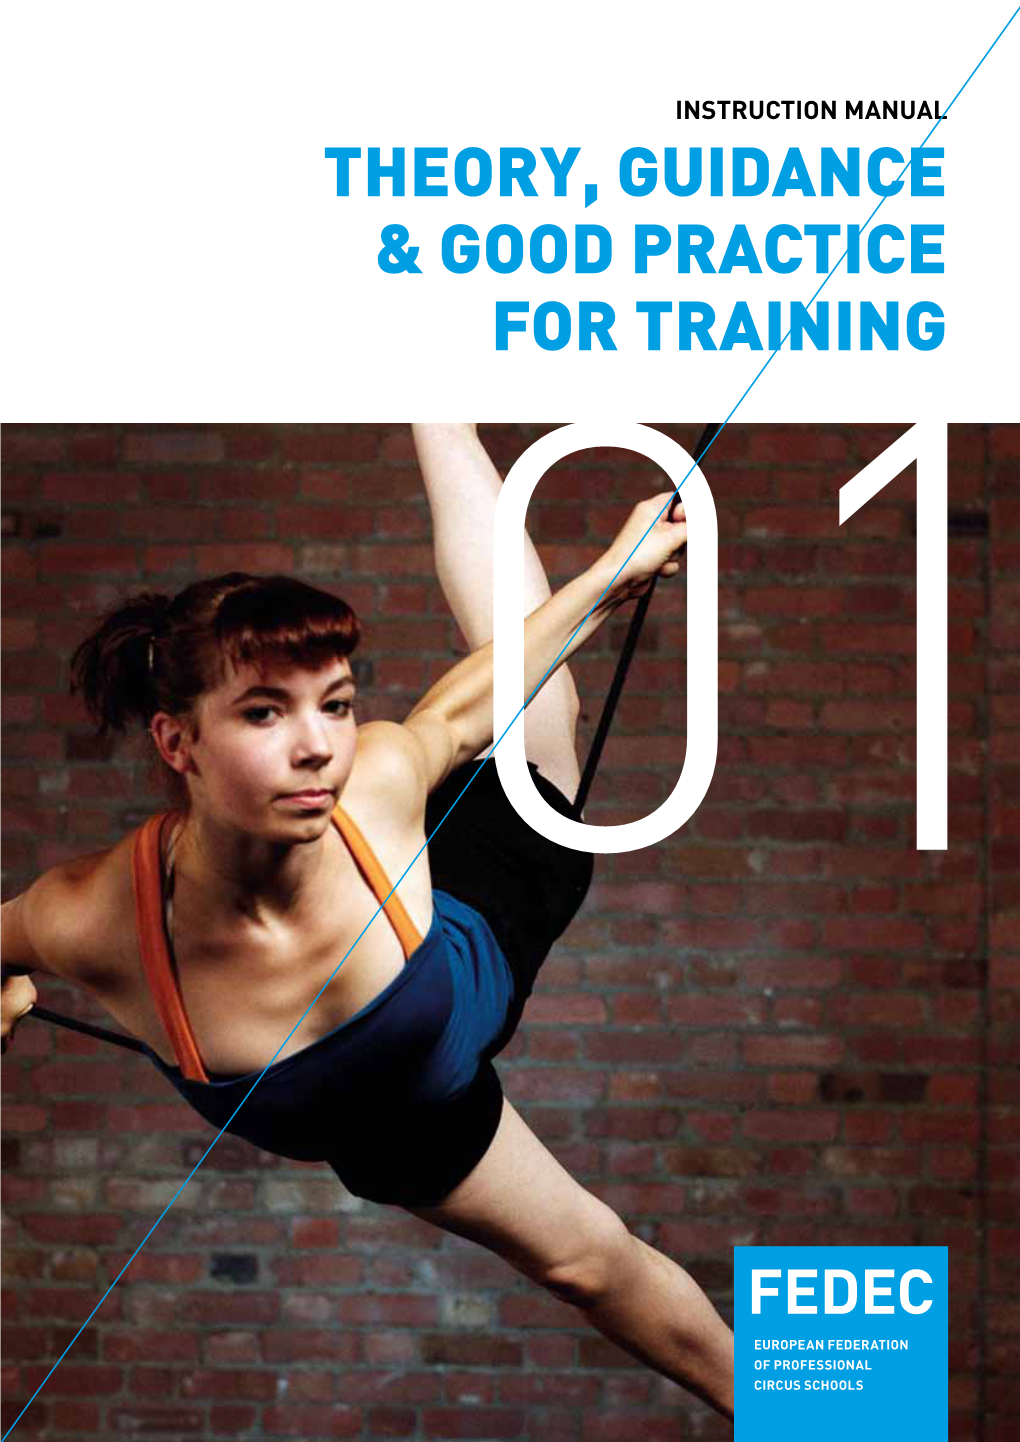 Theory, Guidance & Good Practice for Training